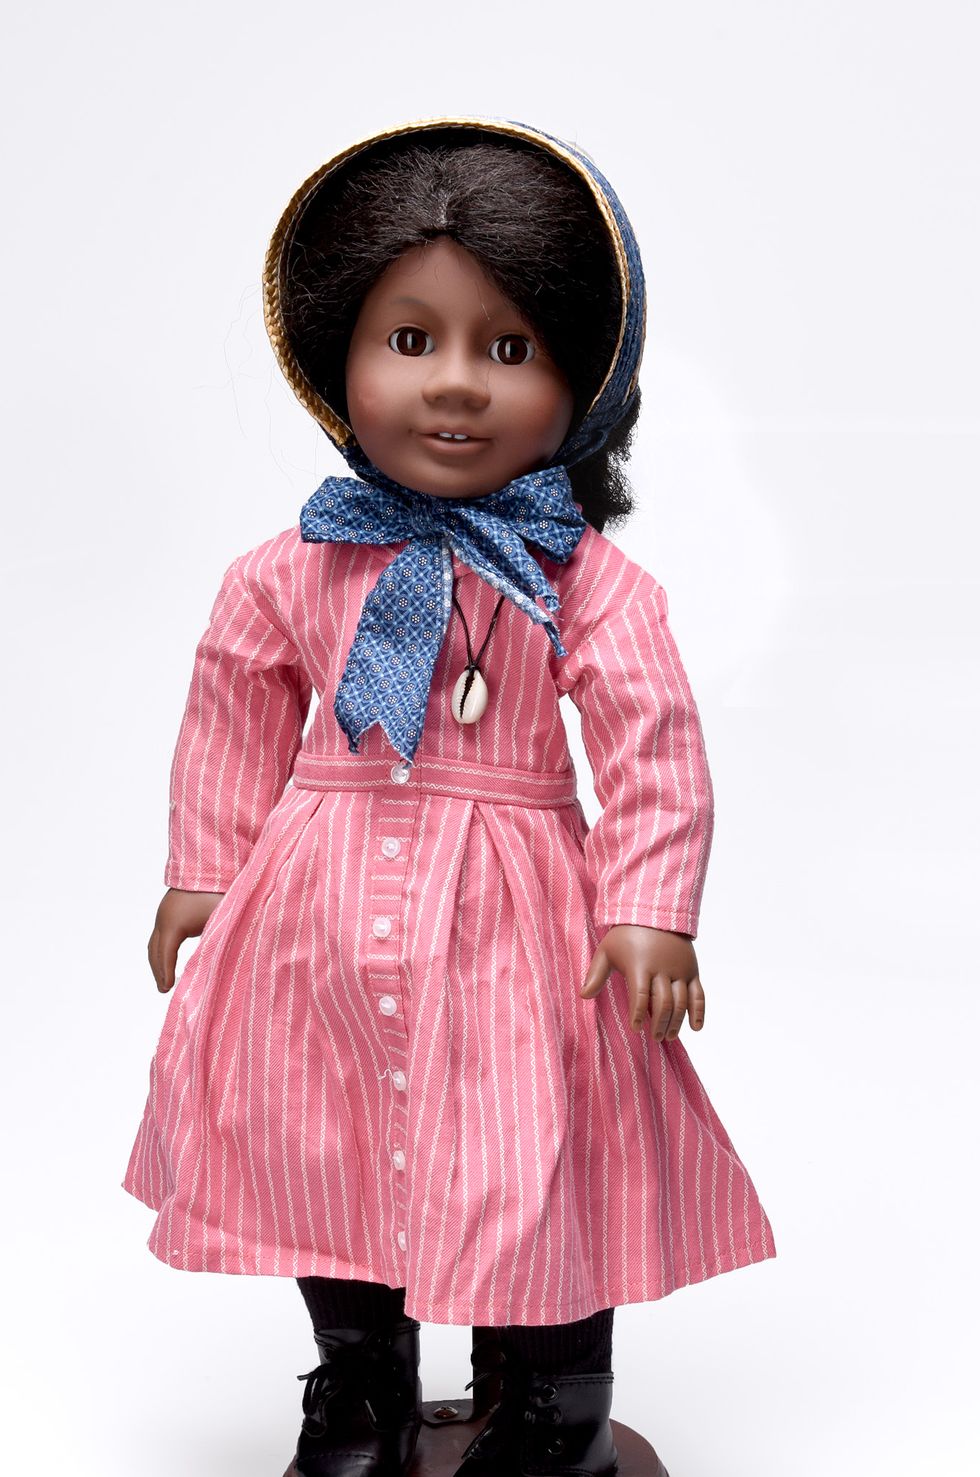 American Girl says the '90s are ancient history. American girls